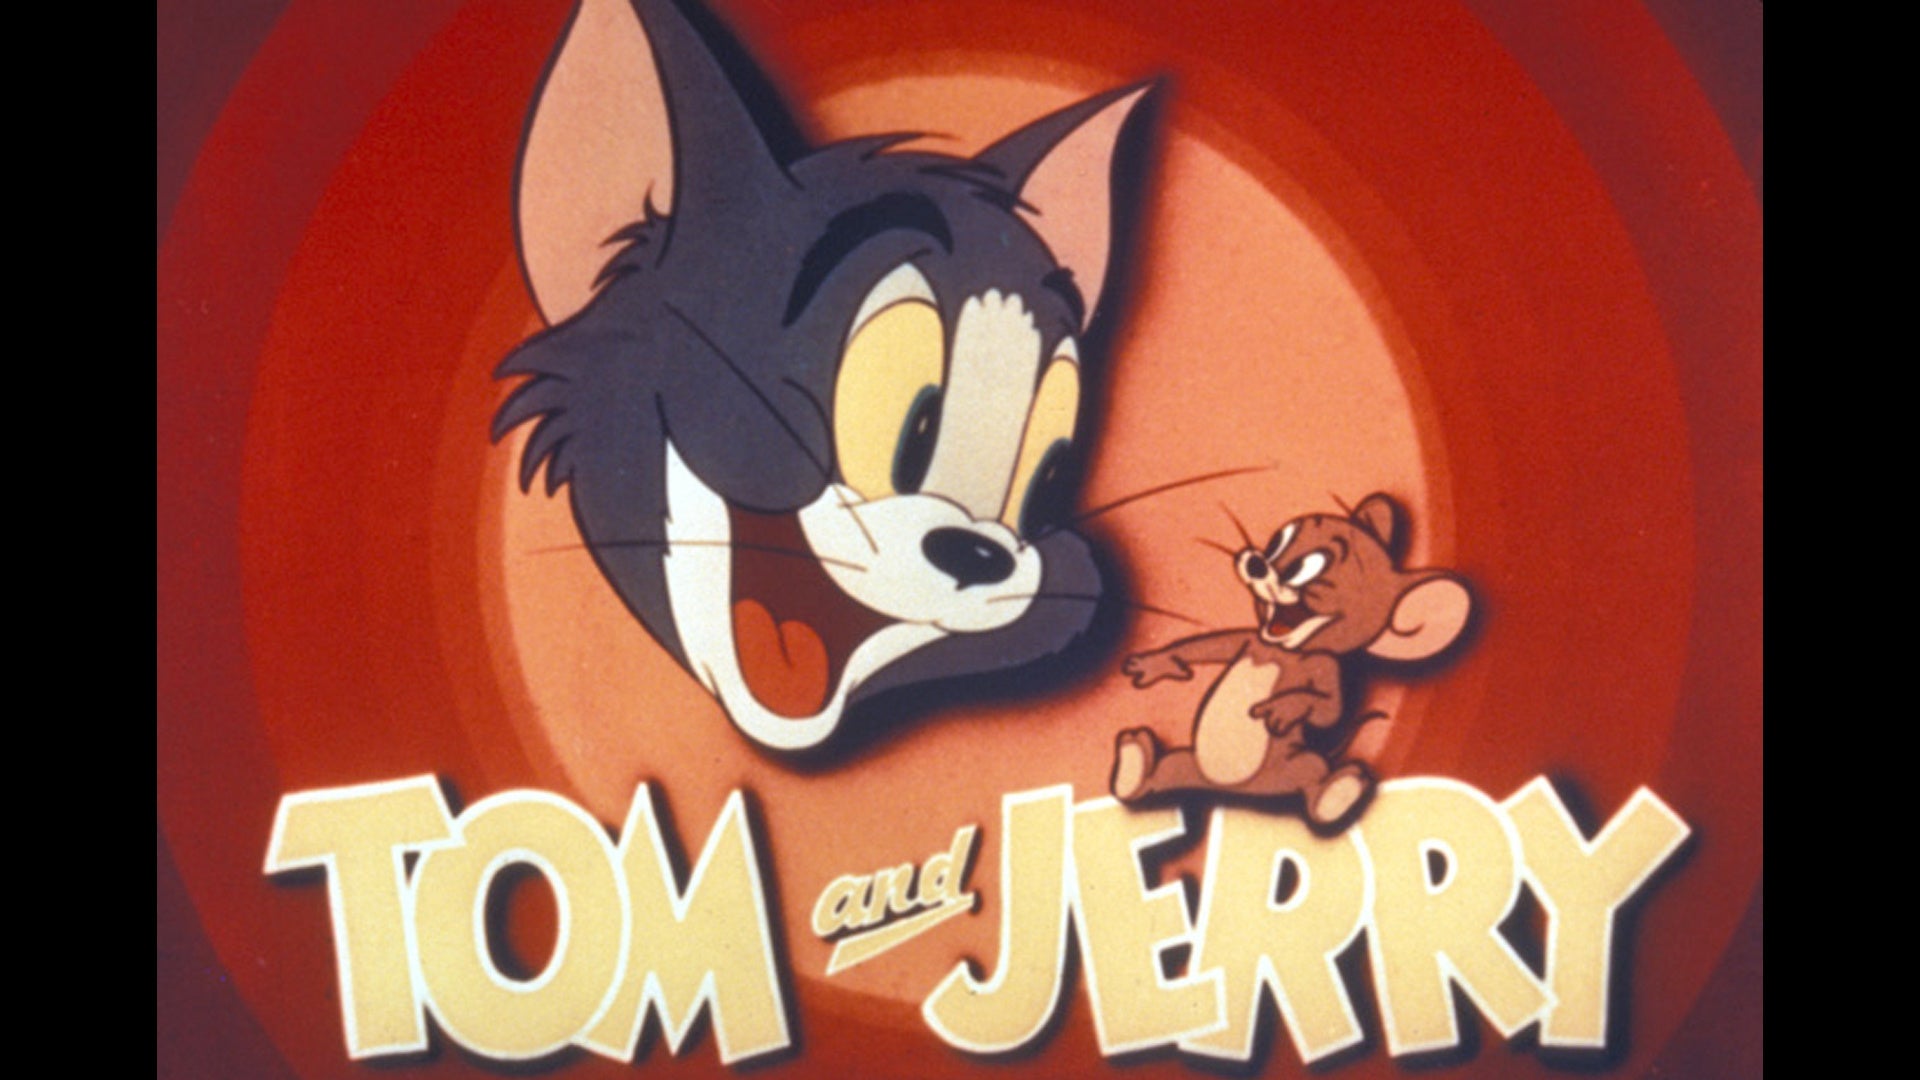 © Turner Entertainment Co.TOM AND JERRY and all related characters and elements are trademarks of and © Turner Entertainment Co